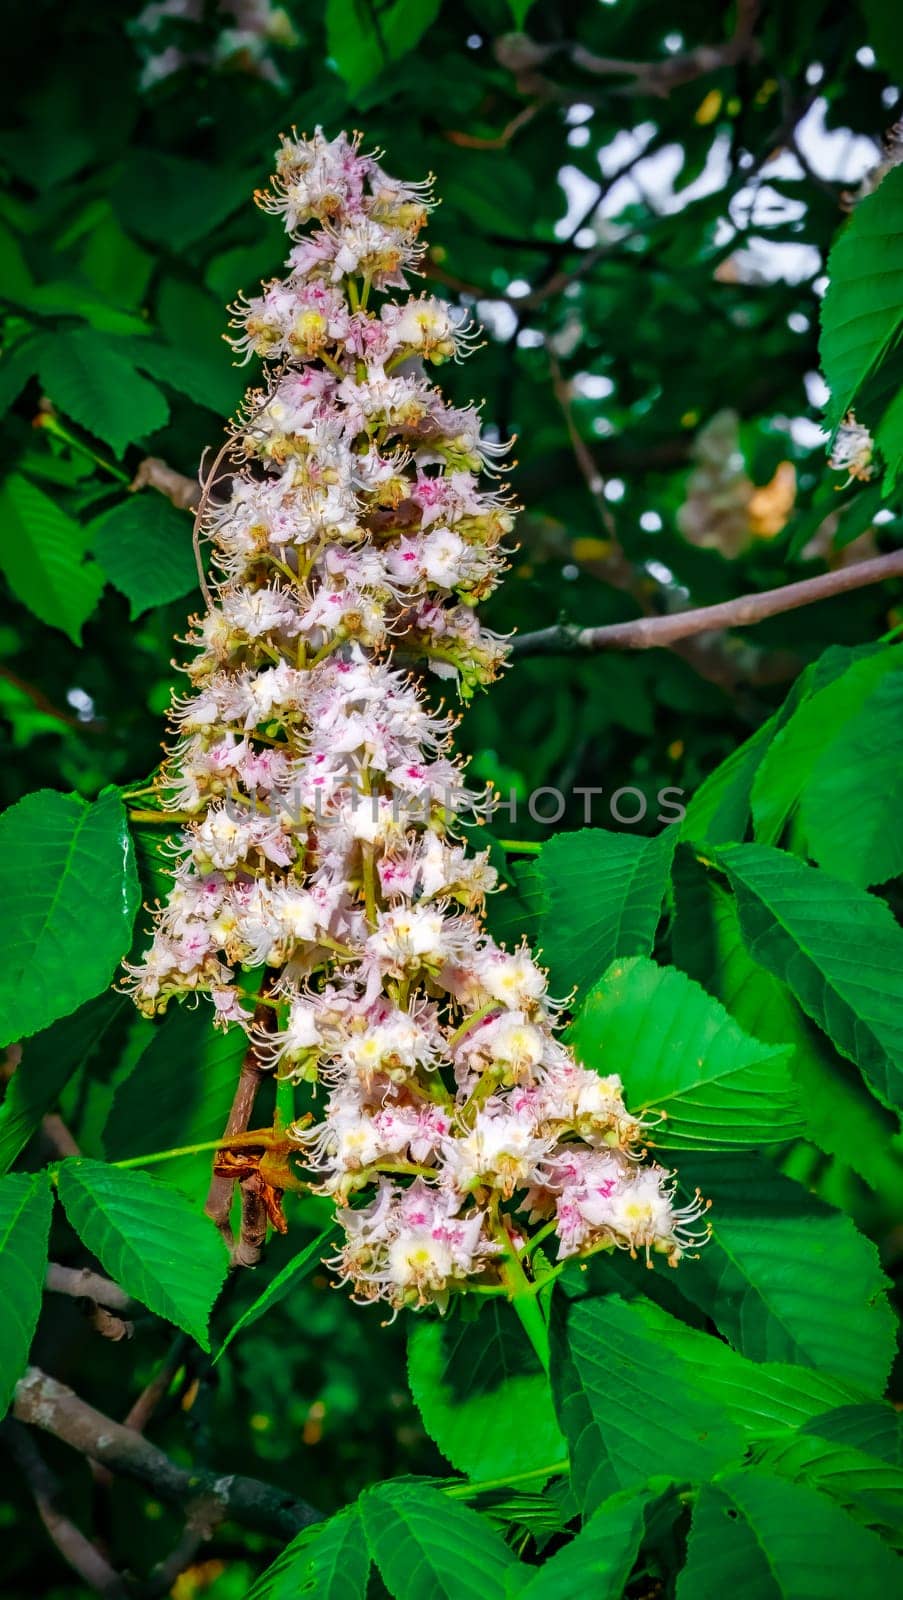 Chestnuts blooming flowers on the green branches. Spring season trees and plants